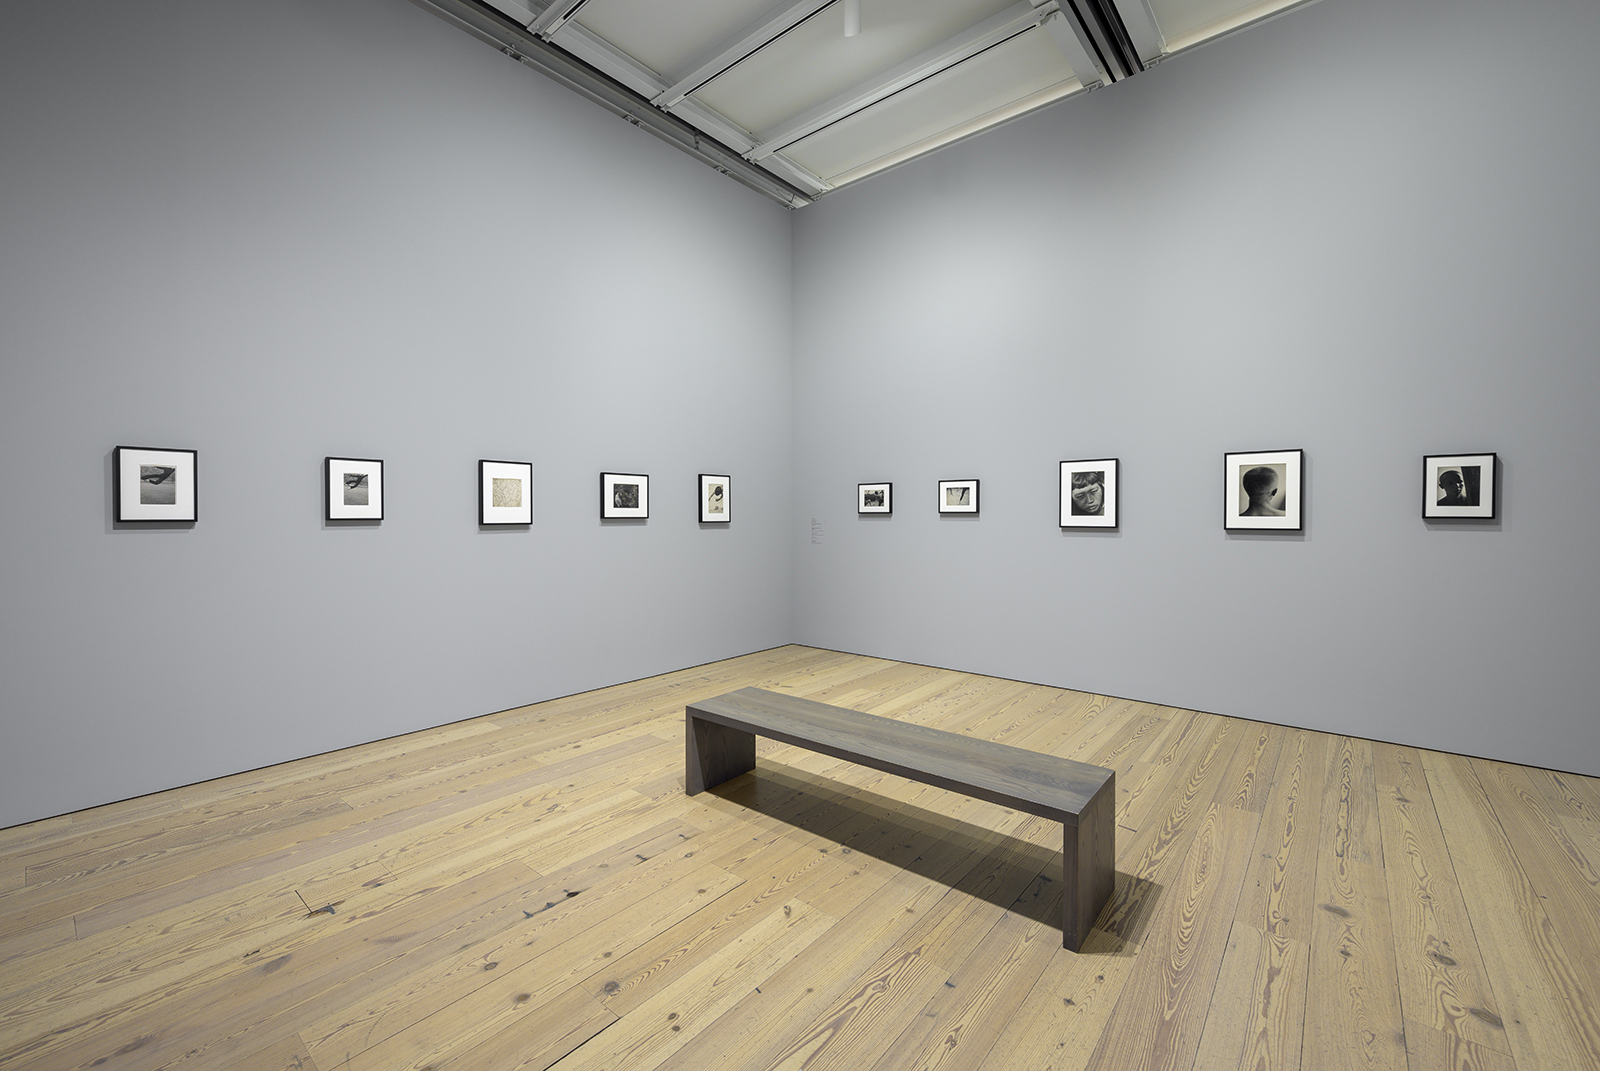 The Whitney’s Collection: Selections from 1900 to 1965 (Whitney Museum of American Art, New York, June 28, 2019-), Artworks © Estate of Hazel Larsen Archer